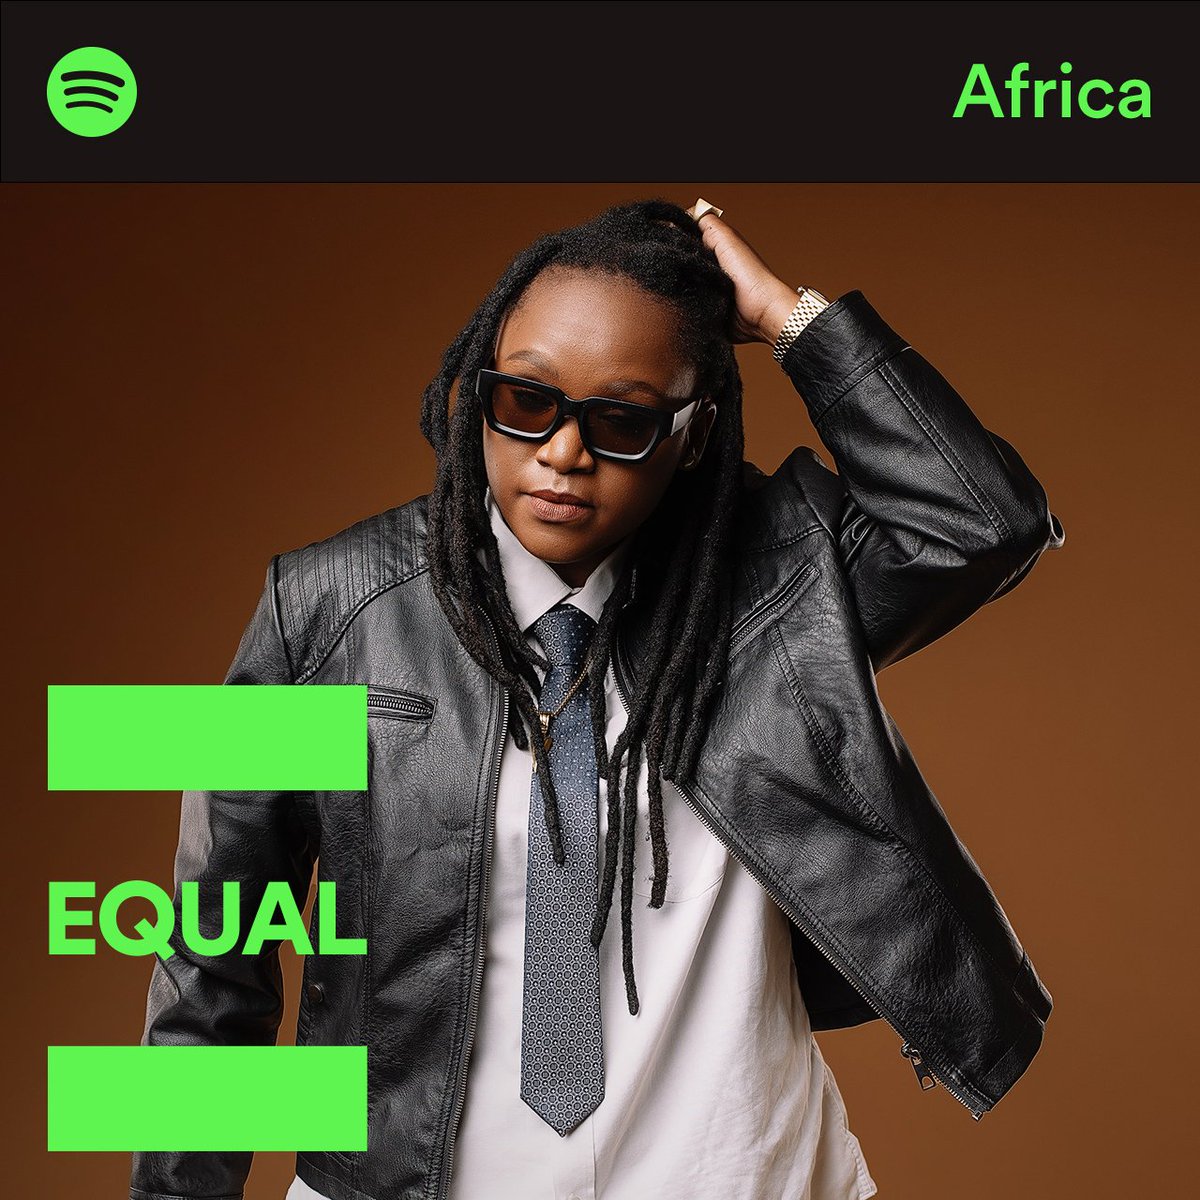 Your @SpotifyAfrica #EqualAfrica ambassador of the month signing out ✌️ Thank you for the recognition of women's powerful voices on the continent. This was a timely pat on the back, so I'mma keep doing my thing until the world says that 'NA!' 🙏♥️ Africa, we up! 🇰🇪